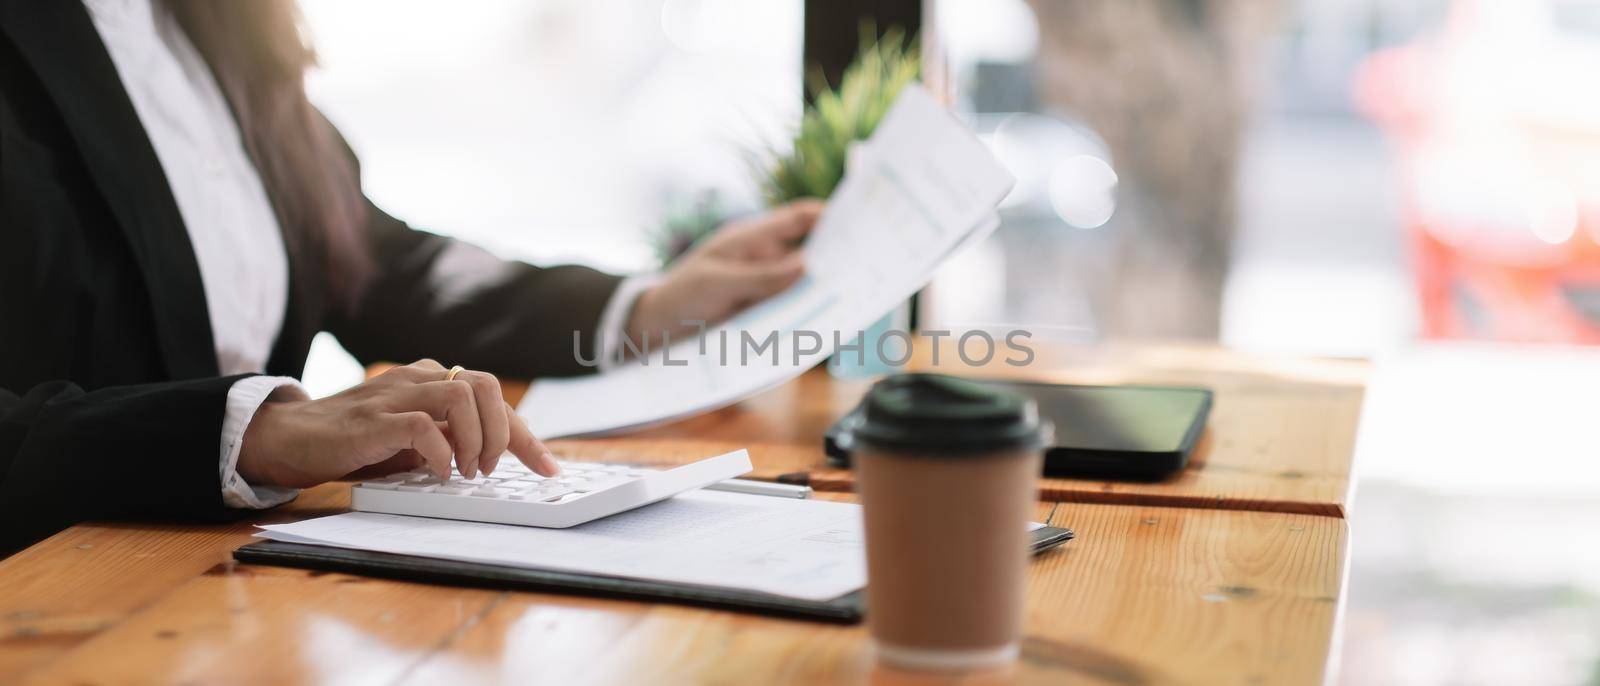 accountant working on desk using calculator for calculate finance report in cafe shop